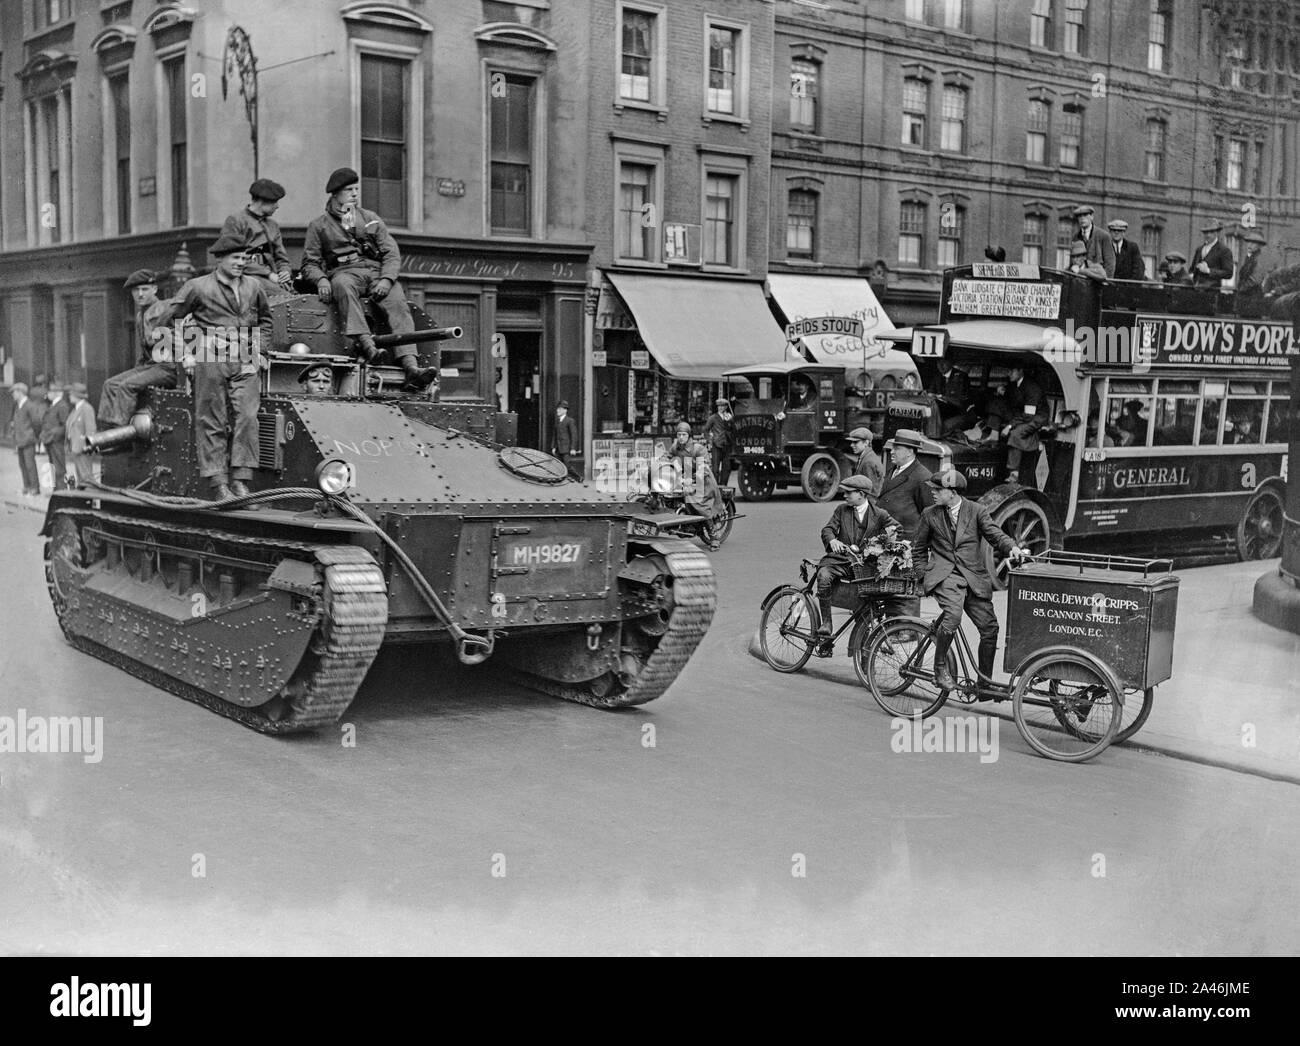 10th May 1926. London, England. Troops in armoured cars on the streets of London in an attempt to keep control and maintain basic services, during the General Strike in the UK, that lasted from 3rd to 12th may 1926. Stock Photo